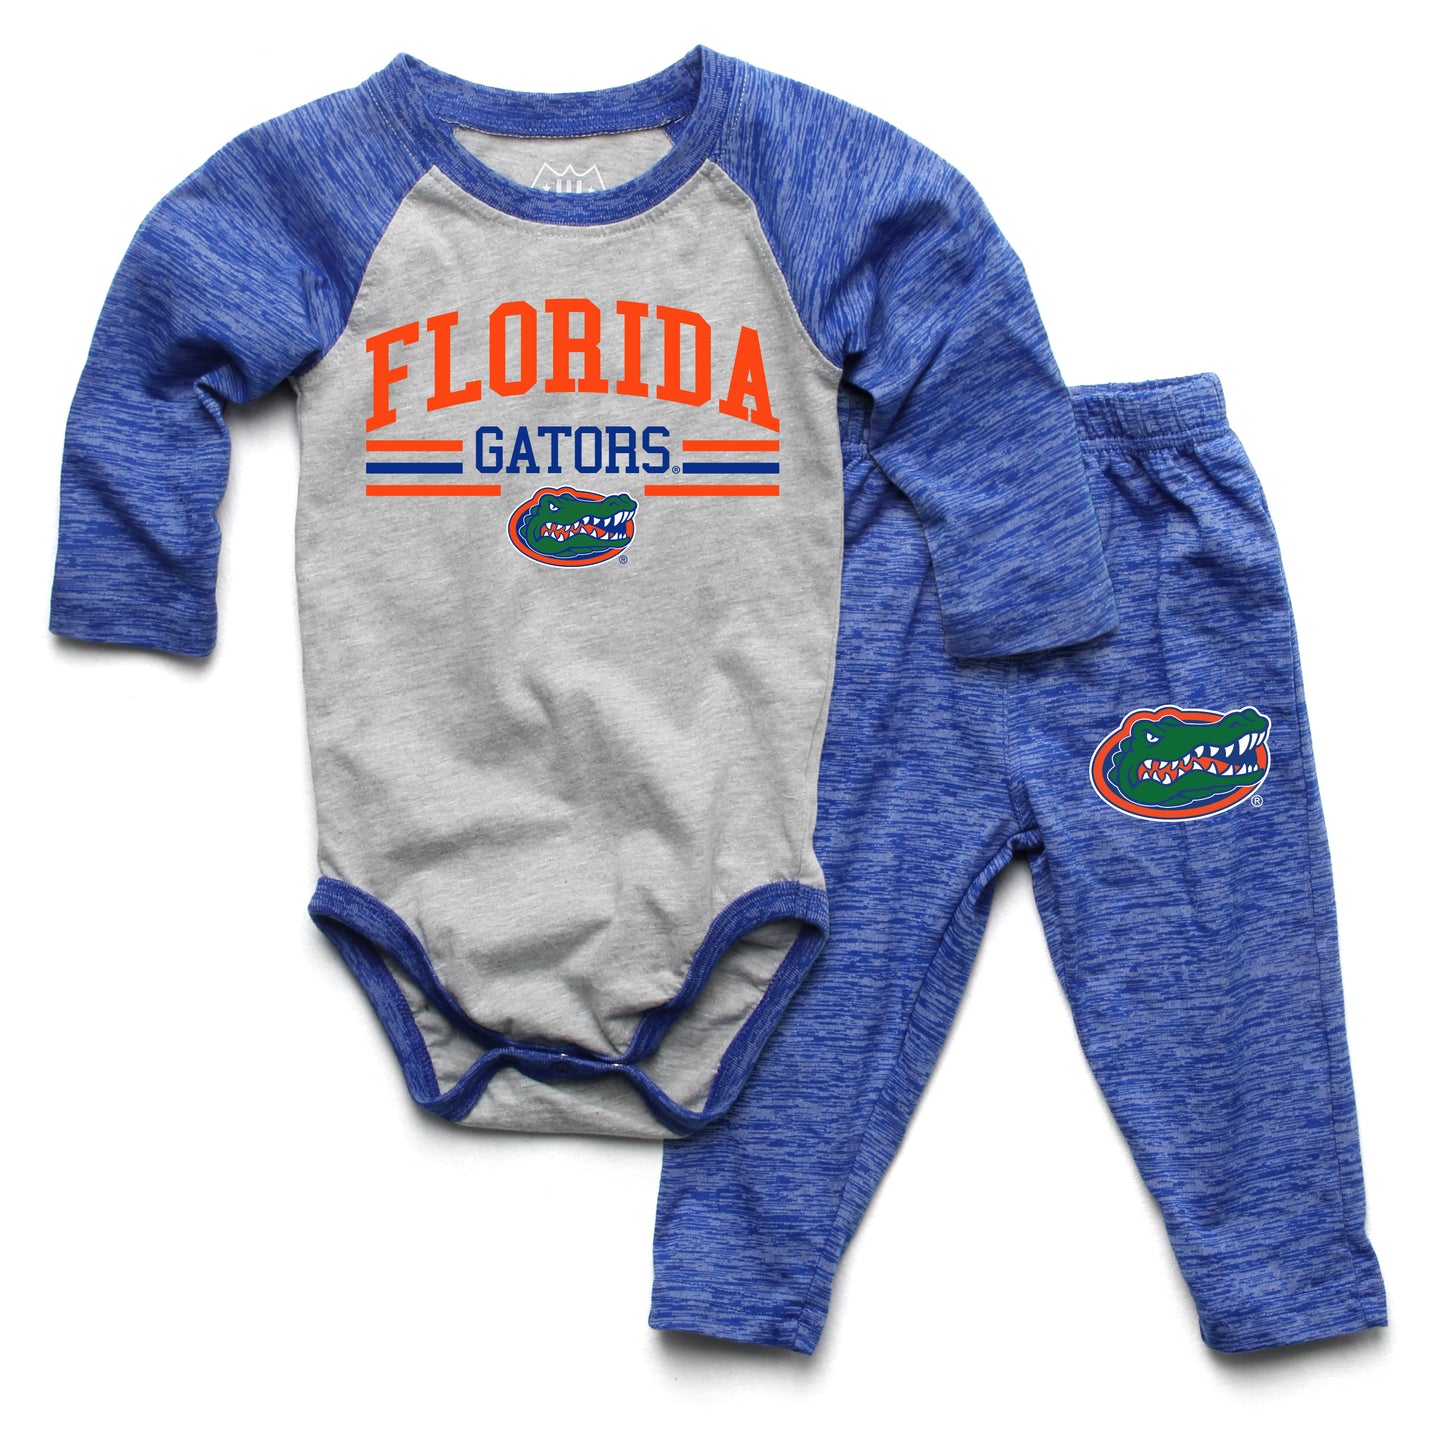 Florida Gators Wes and Willy Baby College Team Hopper and Pant Set Blue